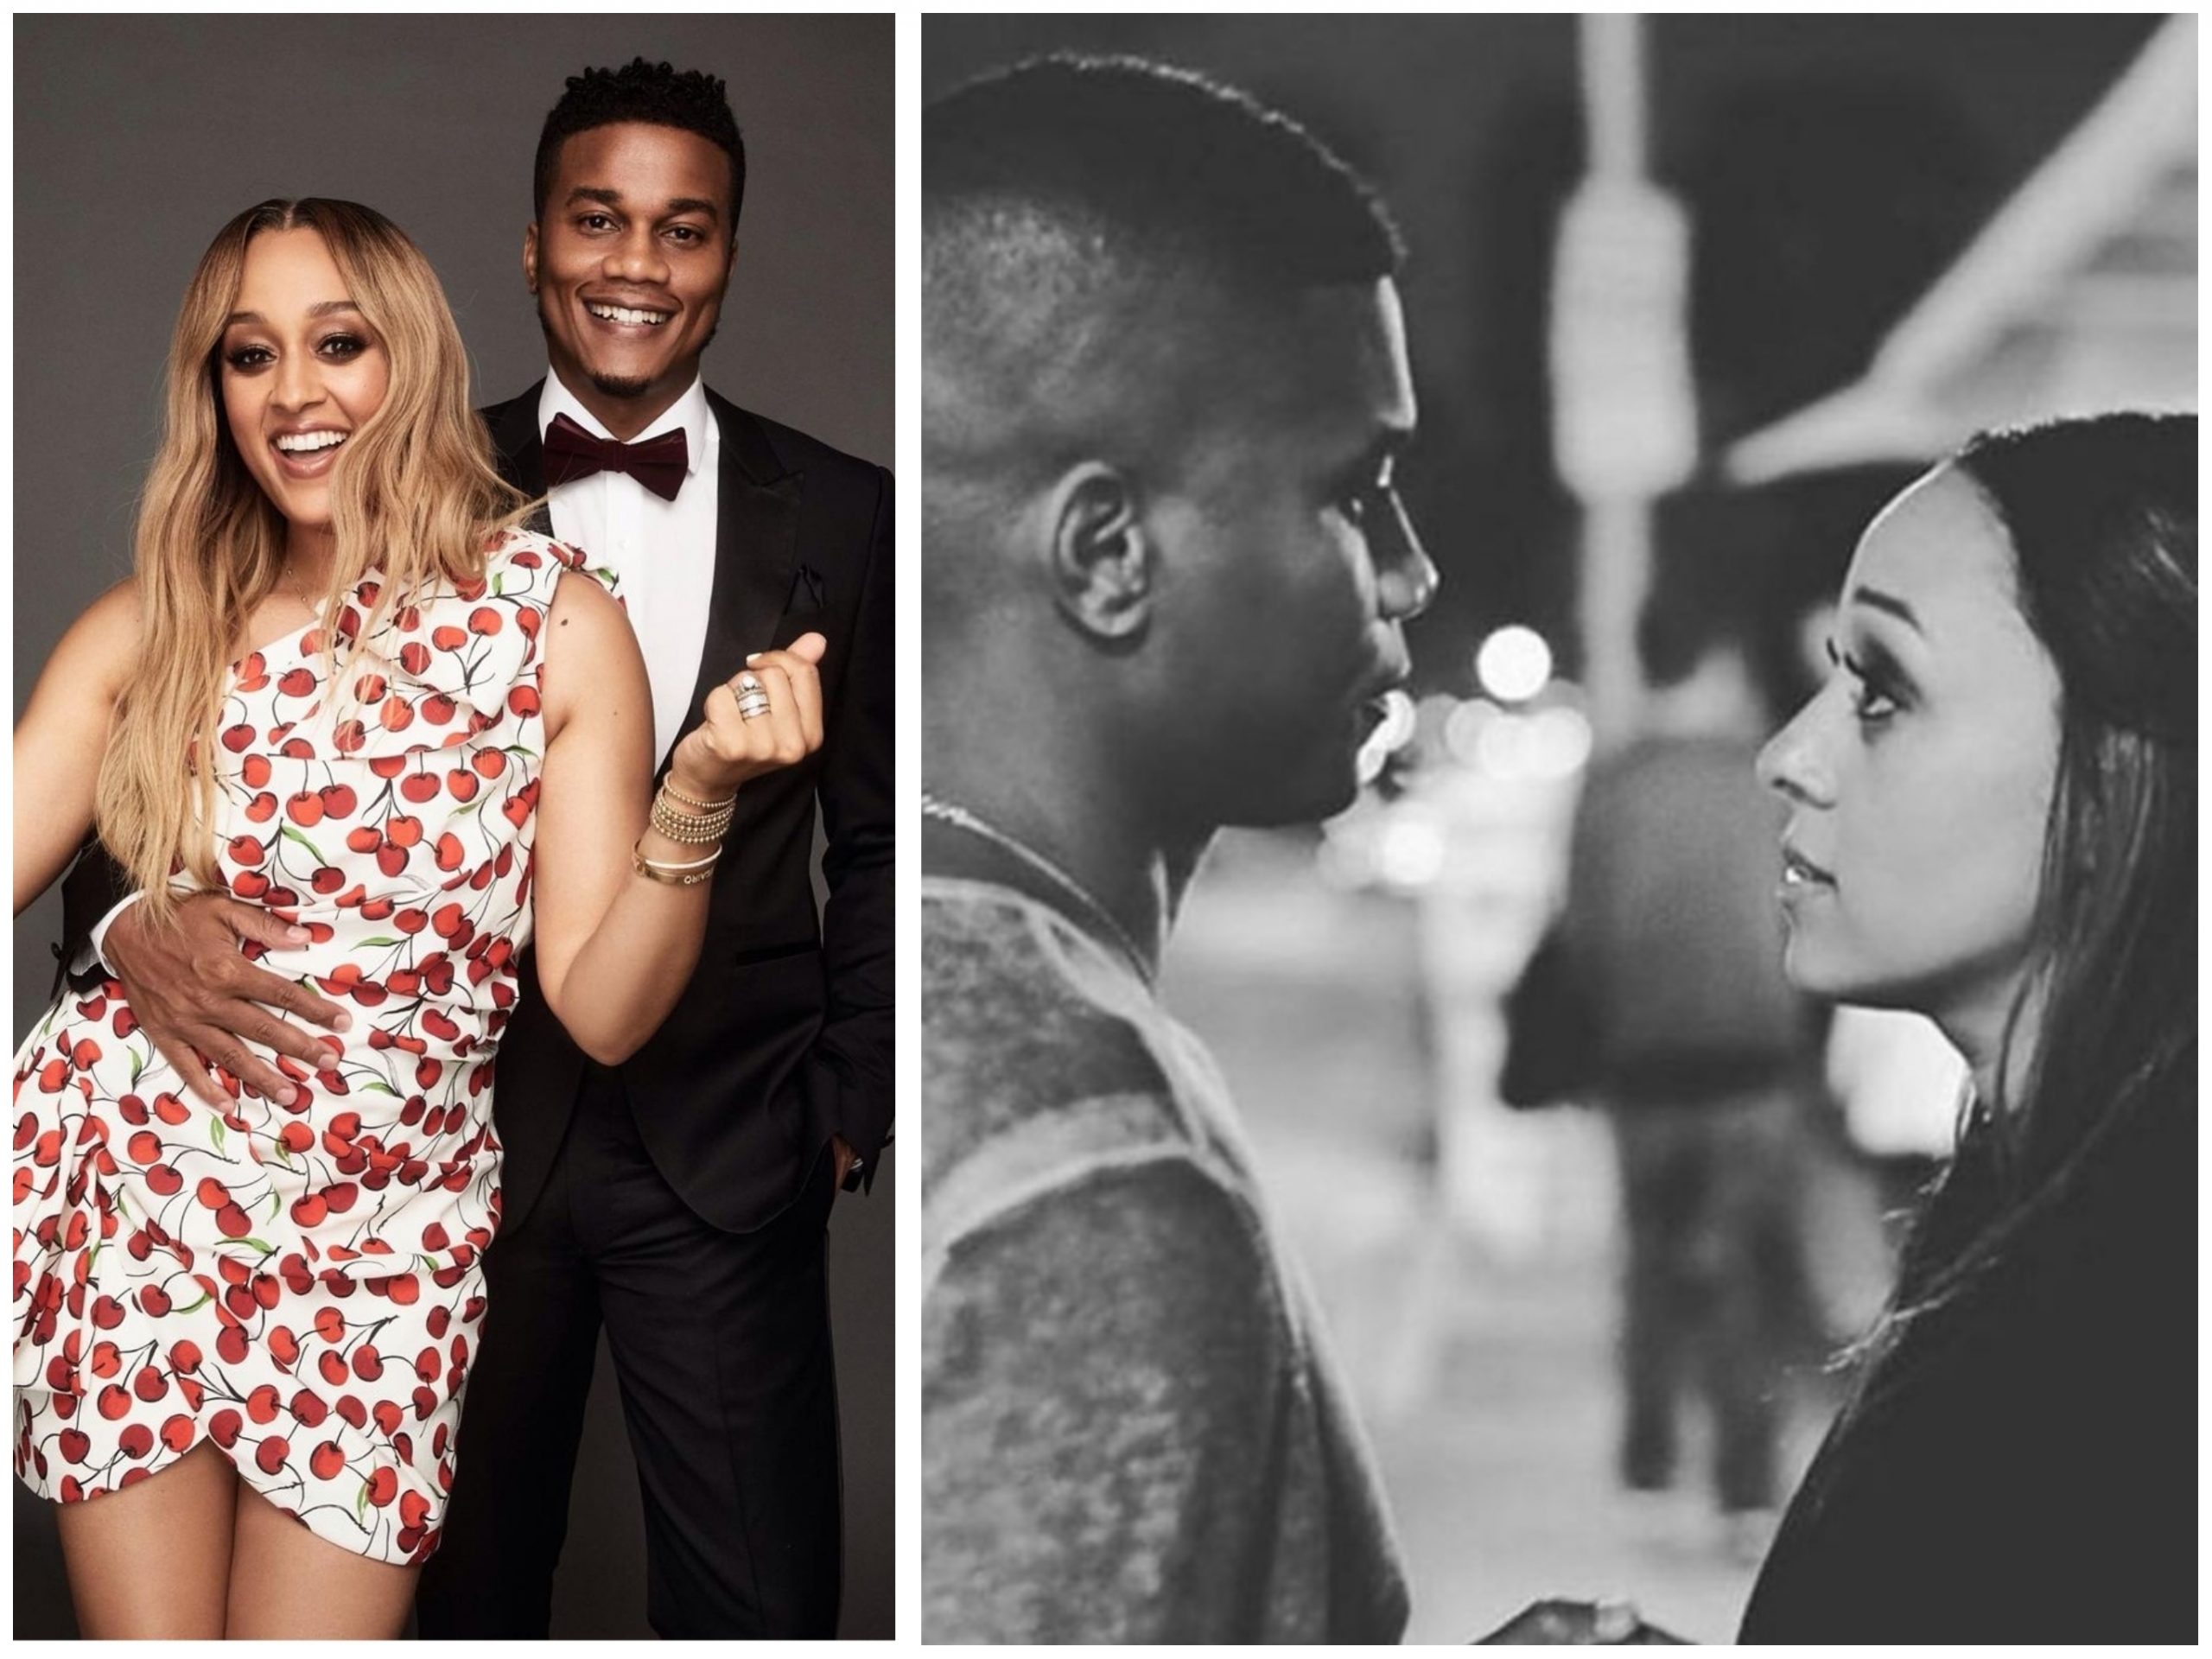 Tia Mowry and Husband Cory Hardrict Split After 14 Years of Marriage